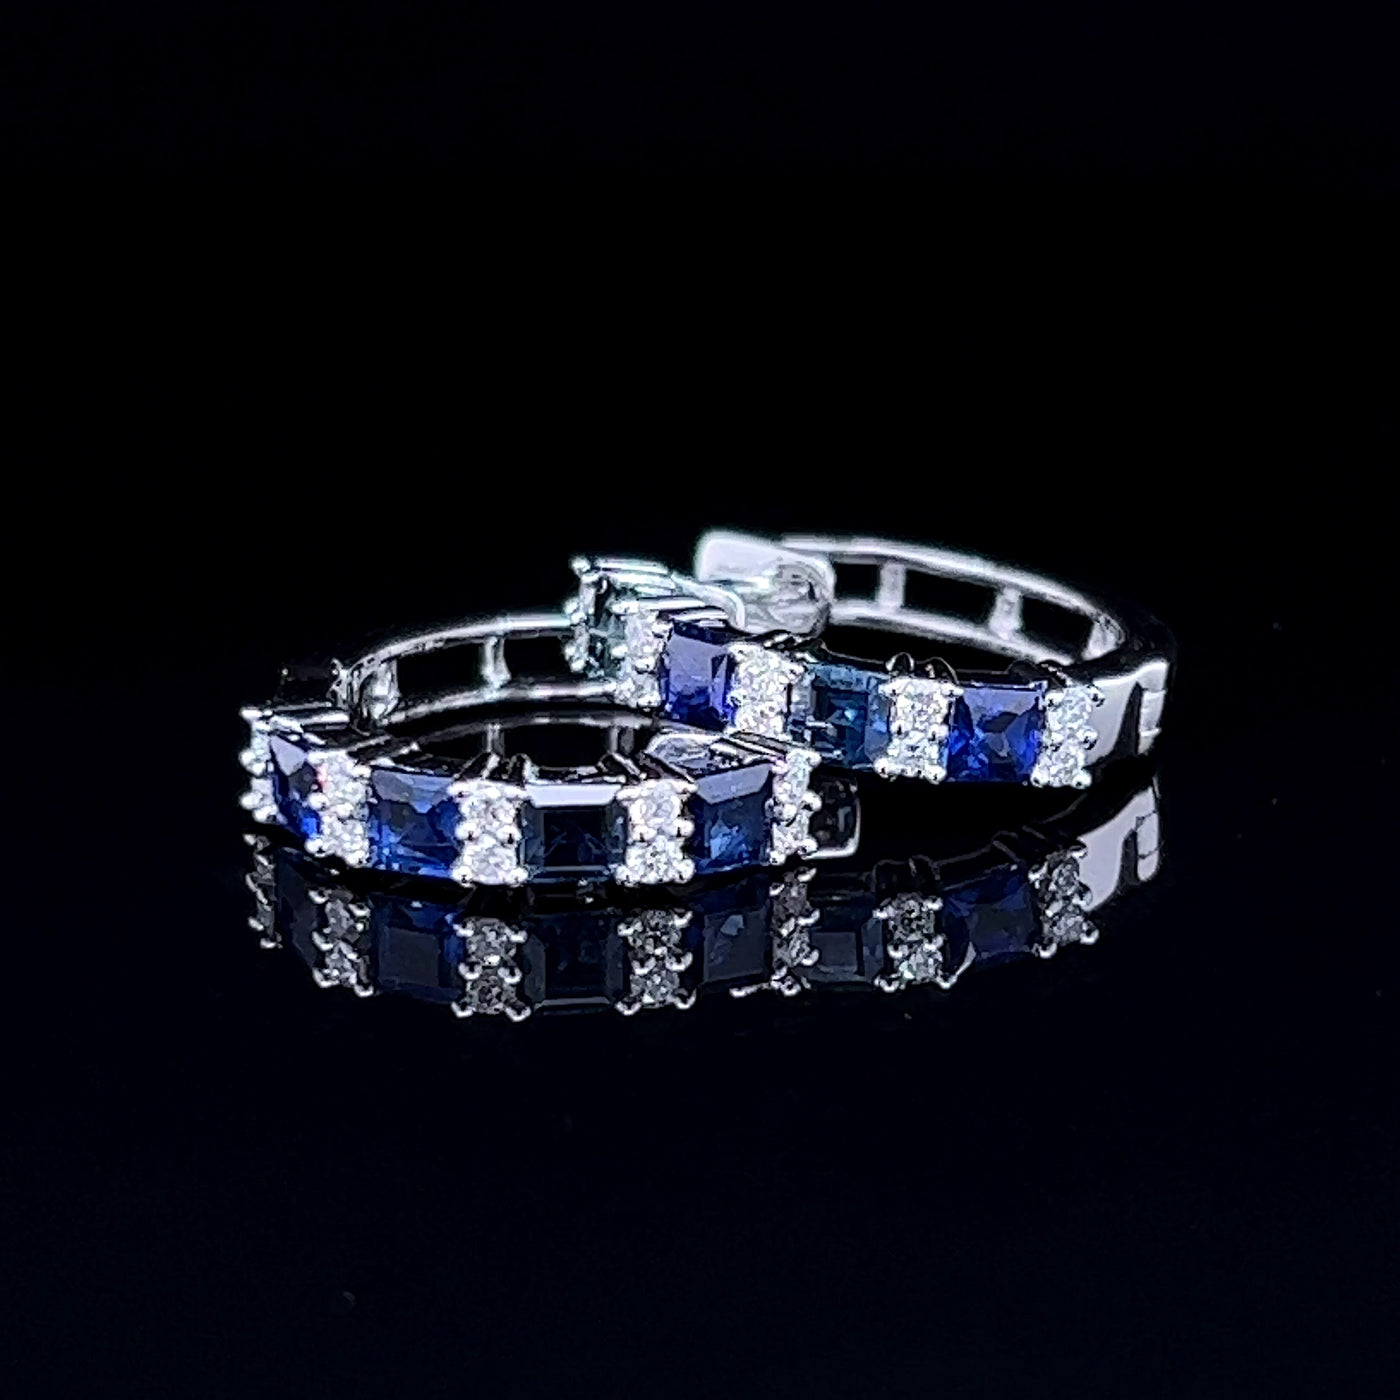 White Gold Sapphire and Diamond Earrings